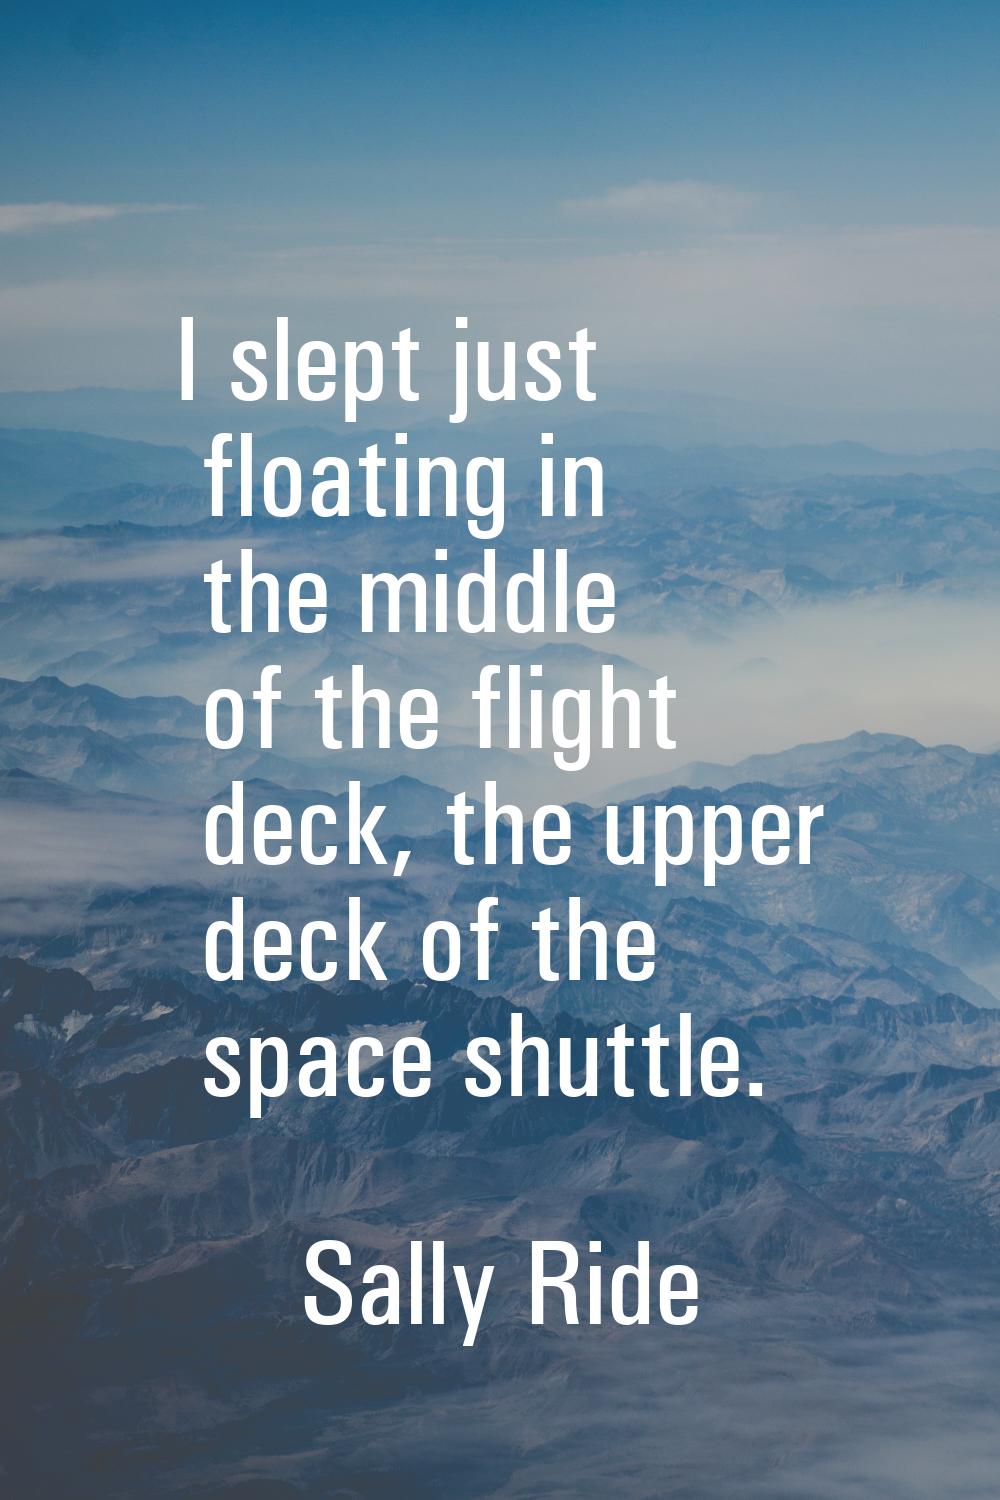 I slept just floating in the middle of the flight deck, the upper deck of the space shuttle.